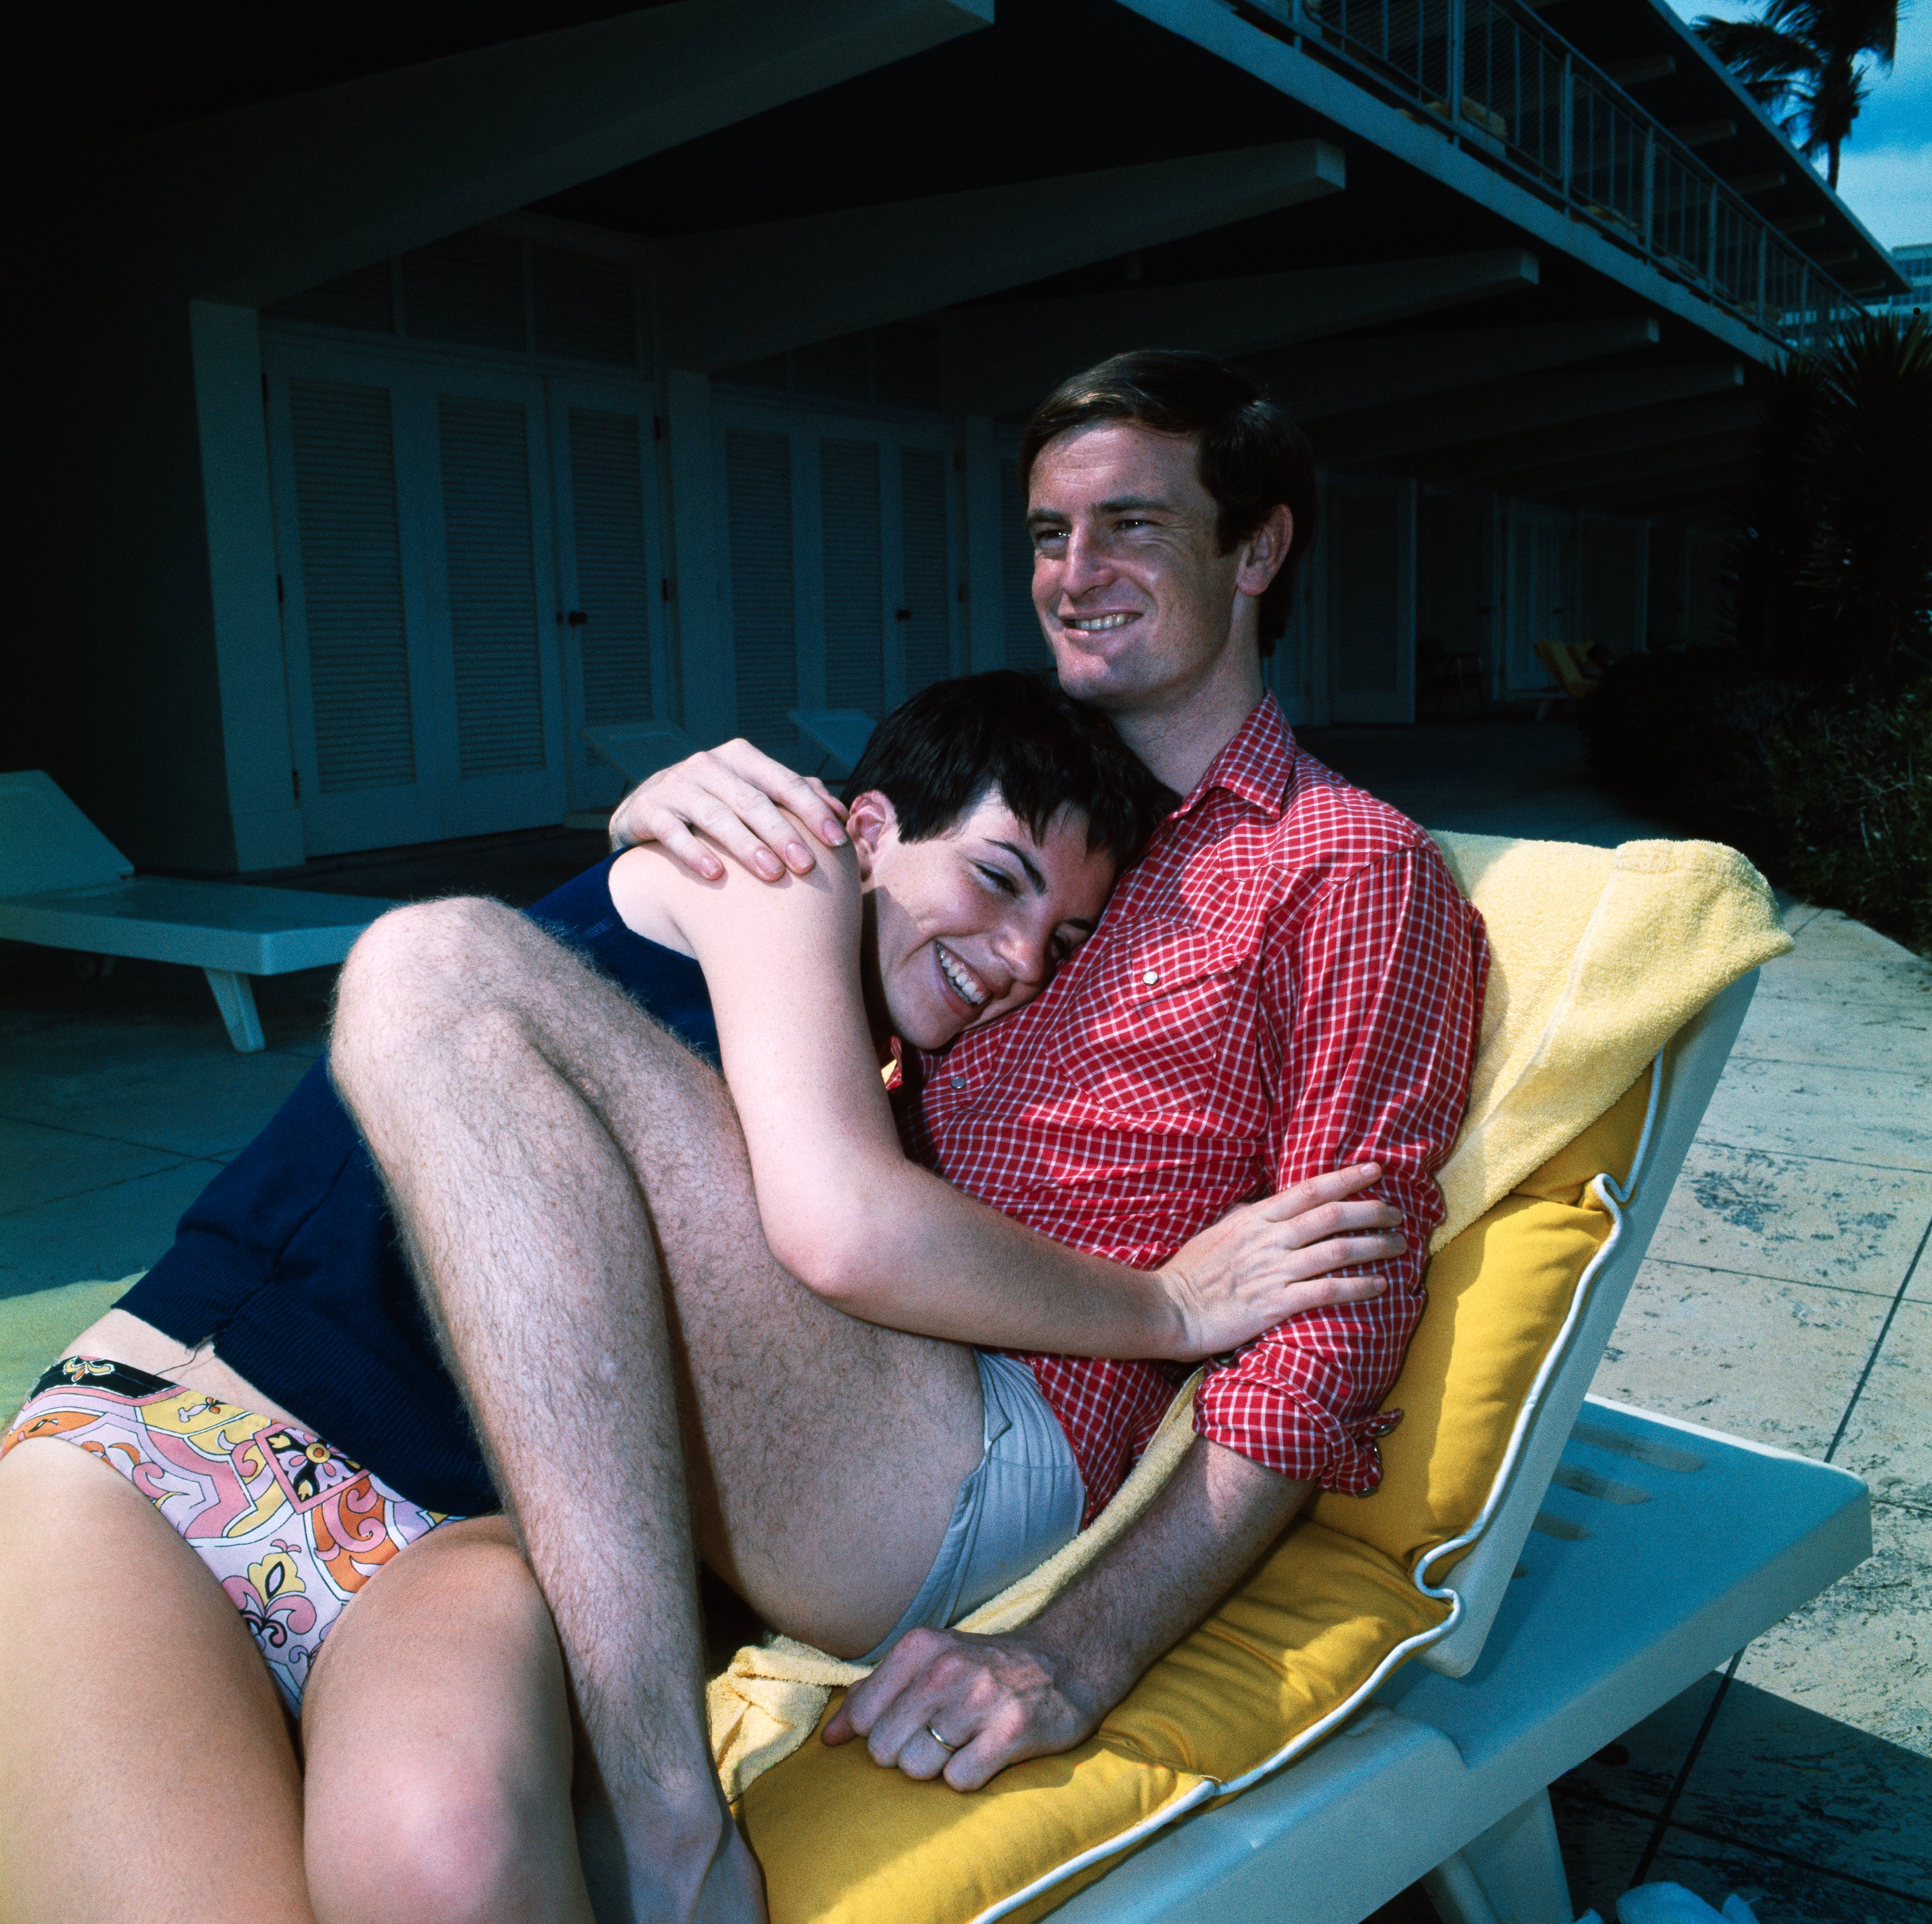 Liza Minnelli and Peter Allen Relaxing on Lounging Chair